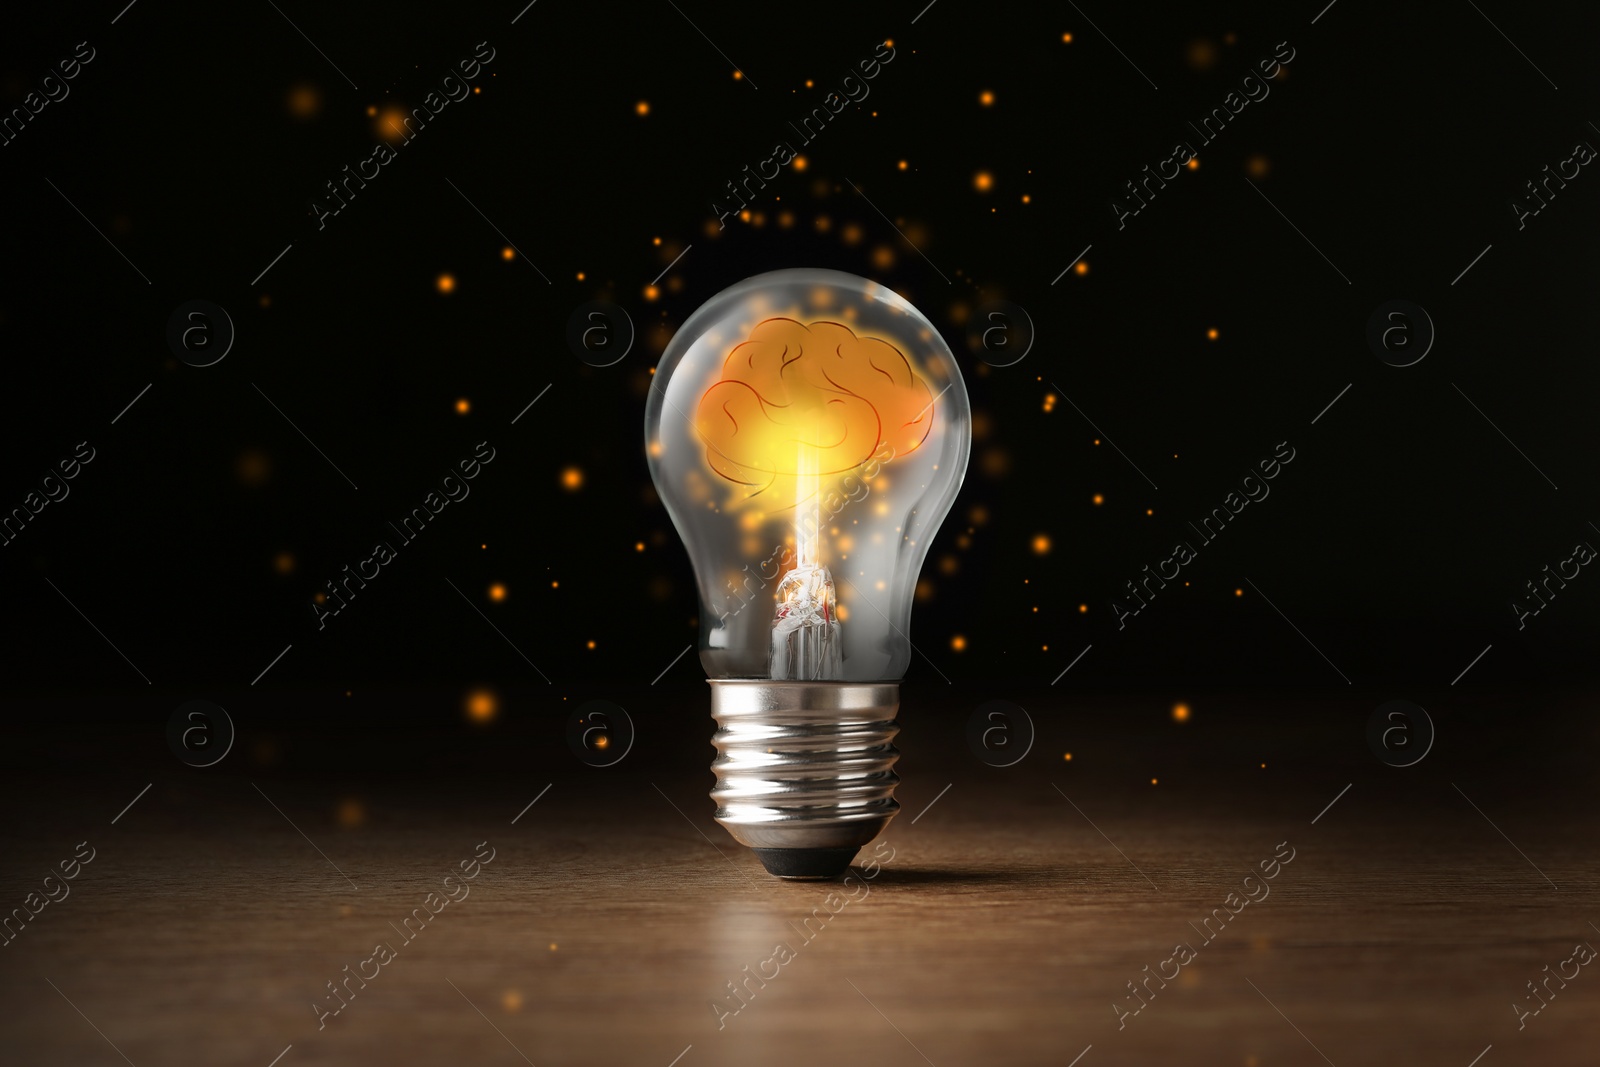 Image of Lamp bulb with shining brain inside on wooden table against black background. Idea generation